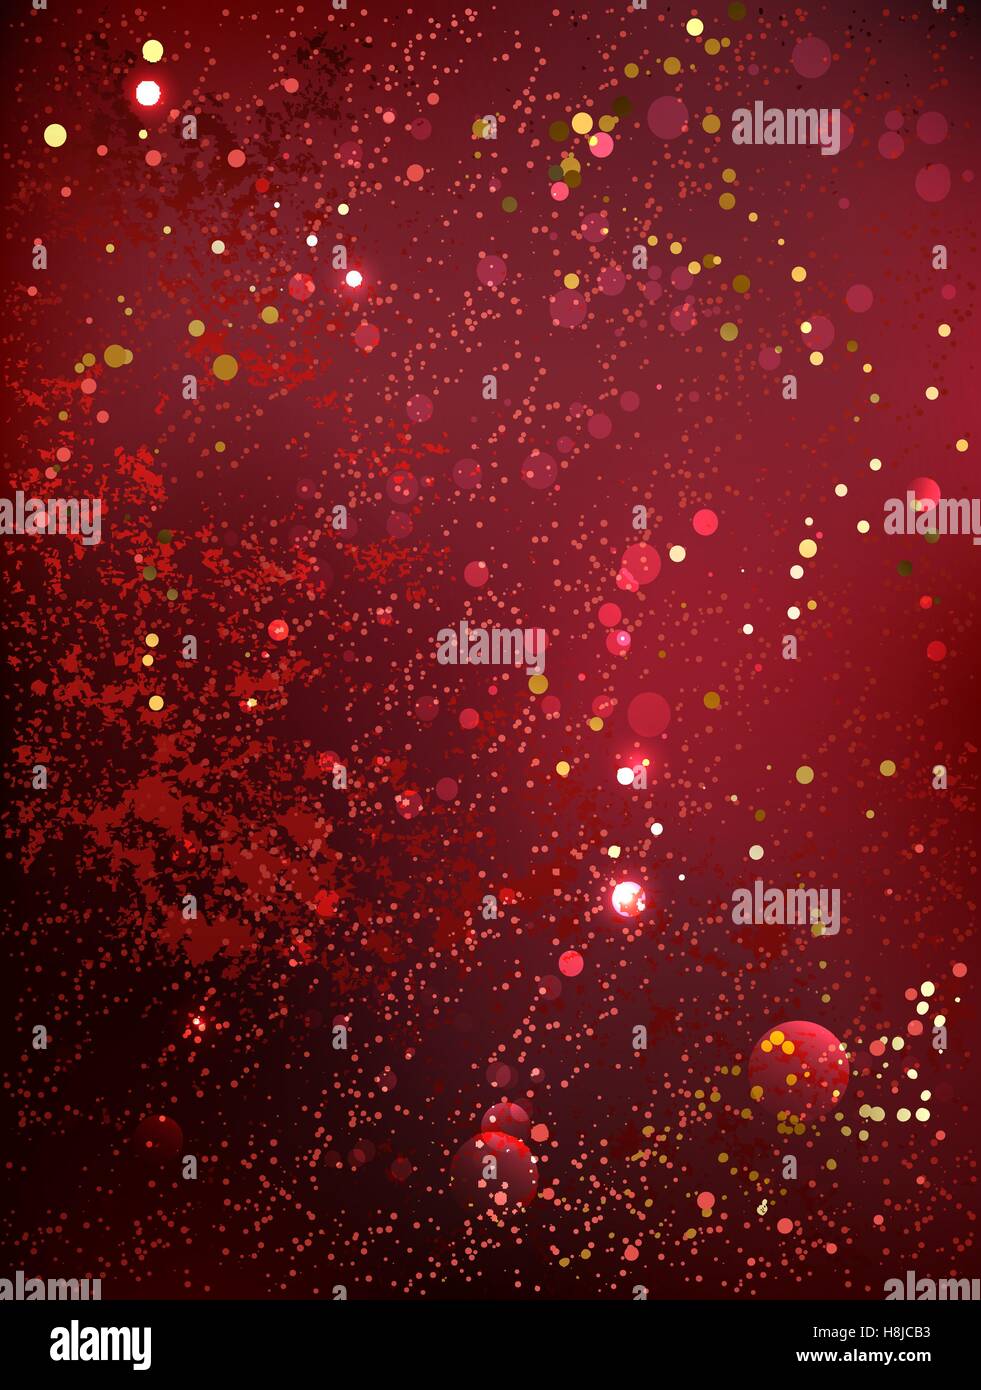 textured, velvety background color marsala with gold sequins. Stock Vector